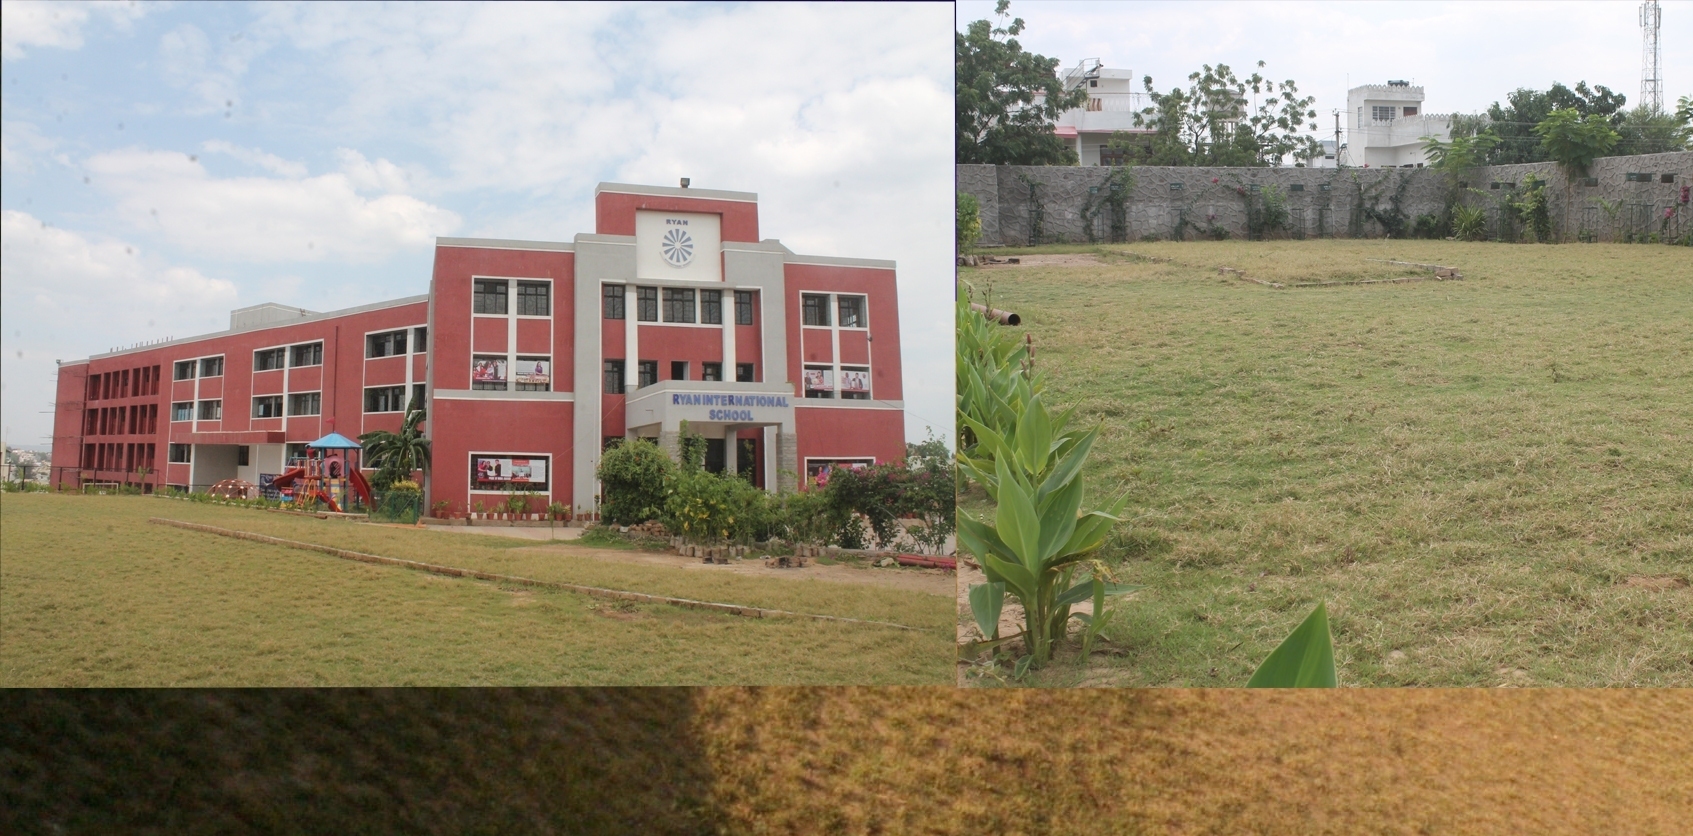 The highest academic standards with a challenging environment - Ryan International School, Udaipur